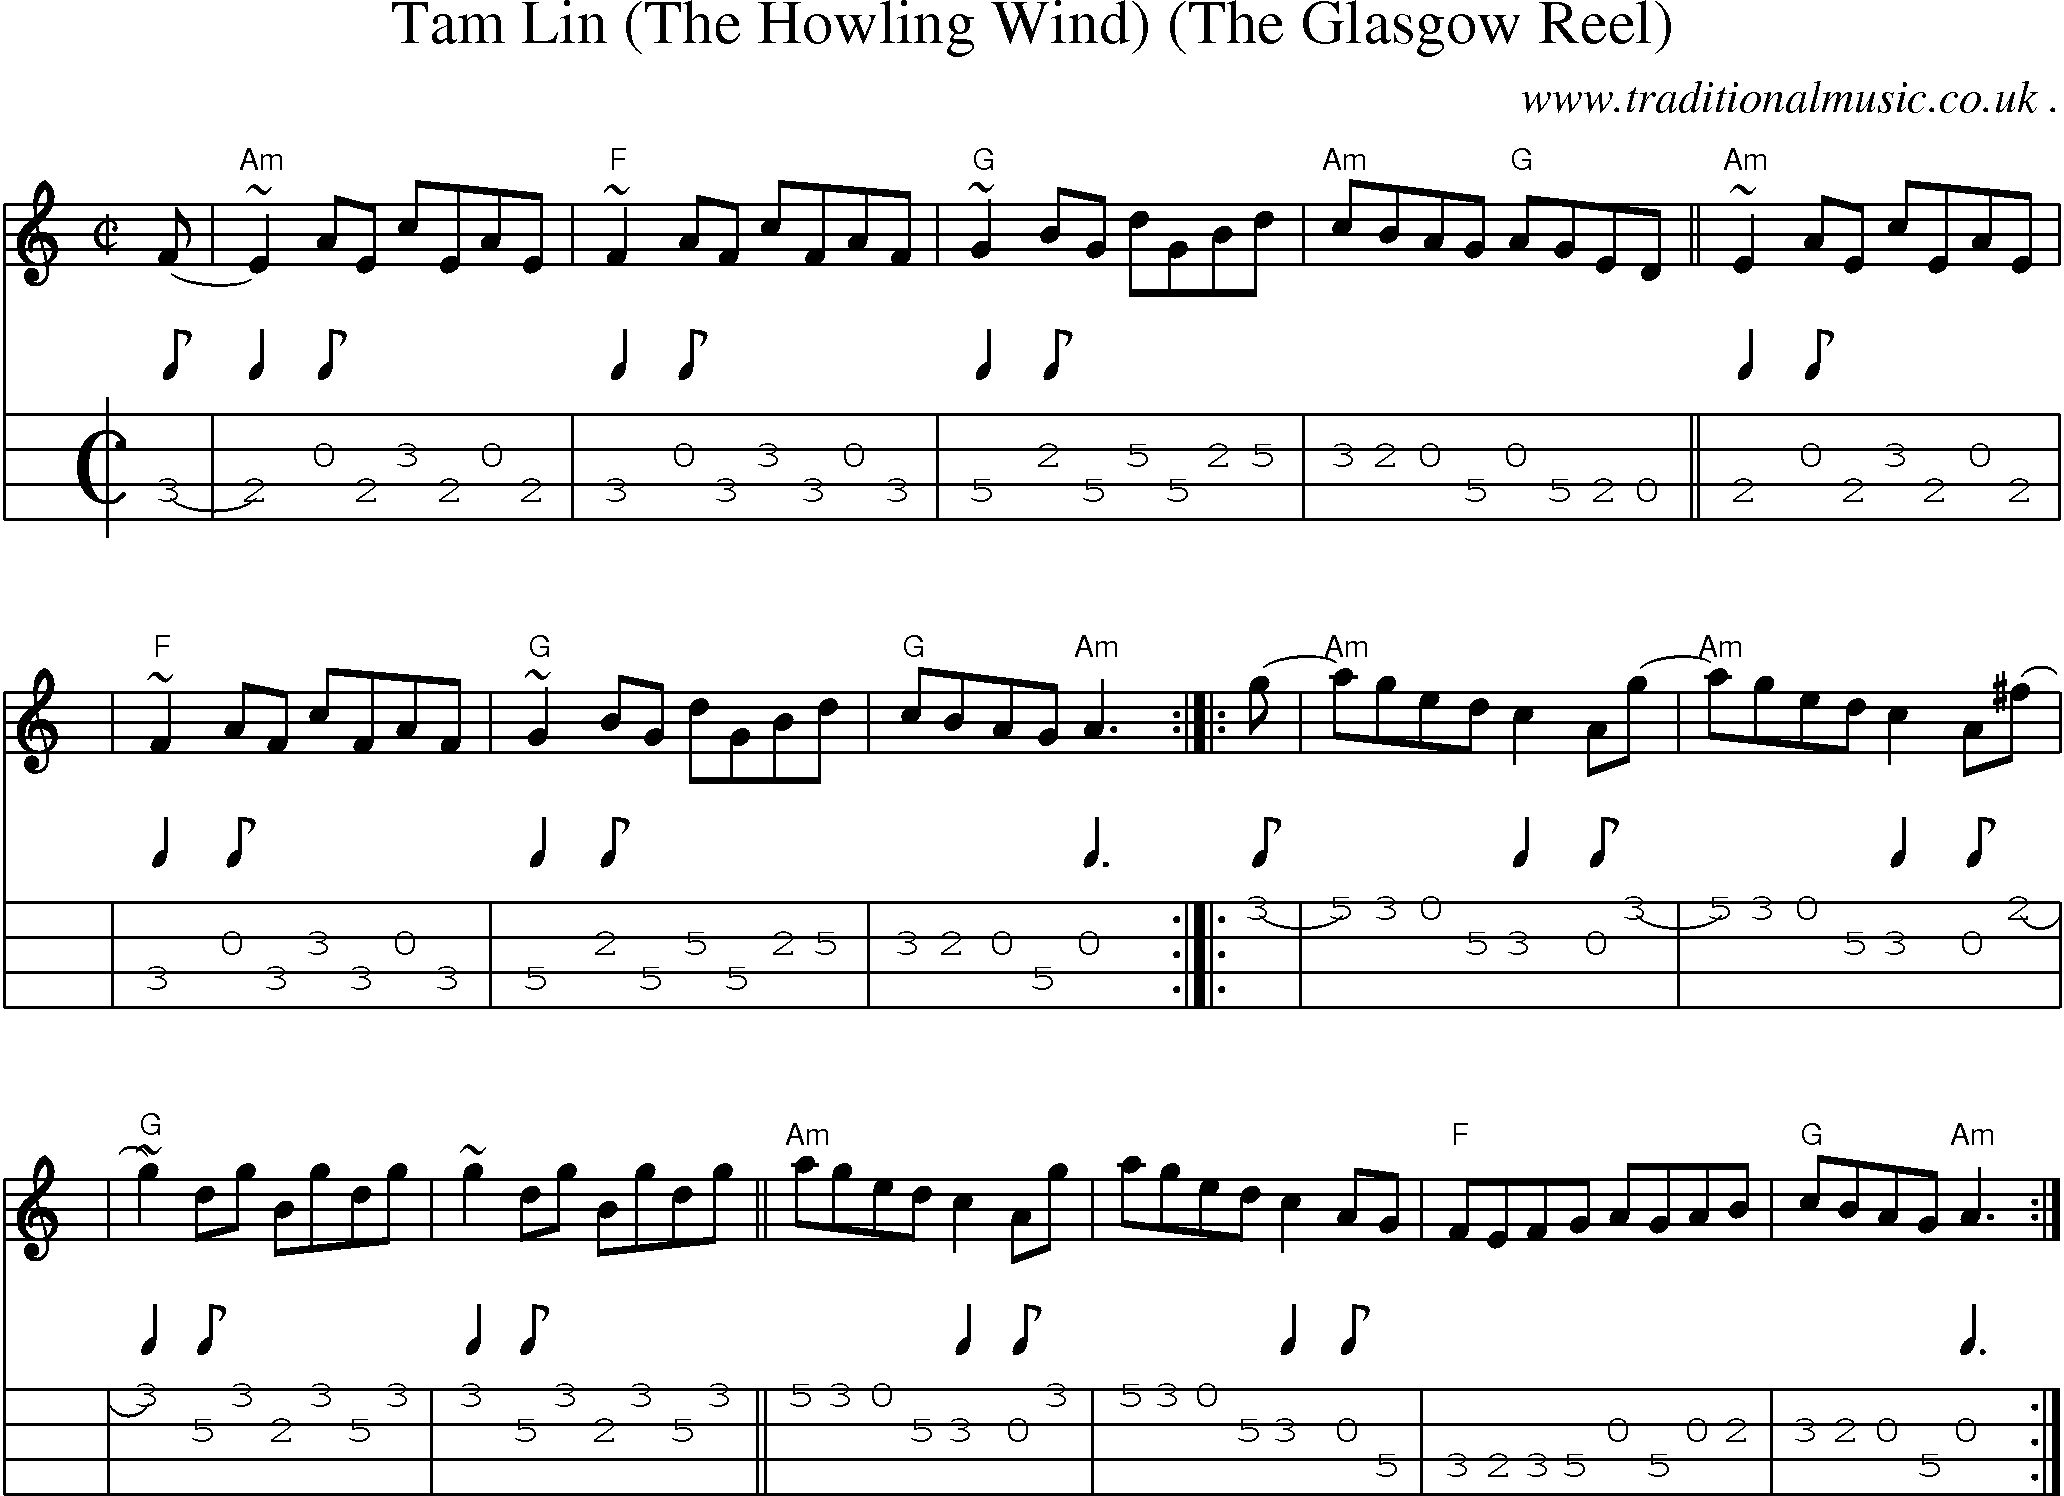 Sheet-music  score, Chords and Mandolin Tabs for Tam Lin The Howling Wind The Glasgow Reel